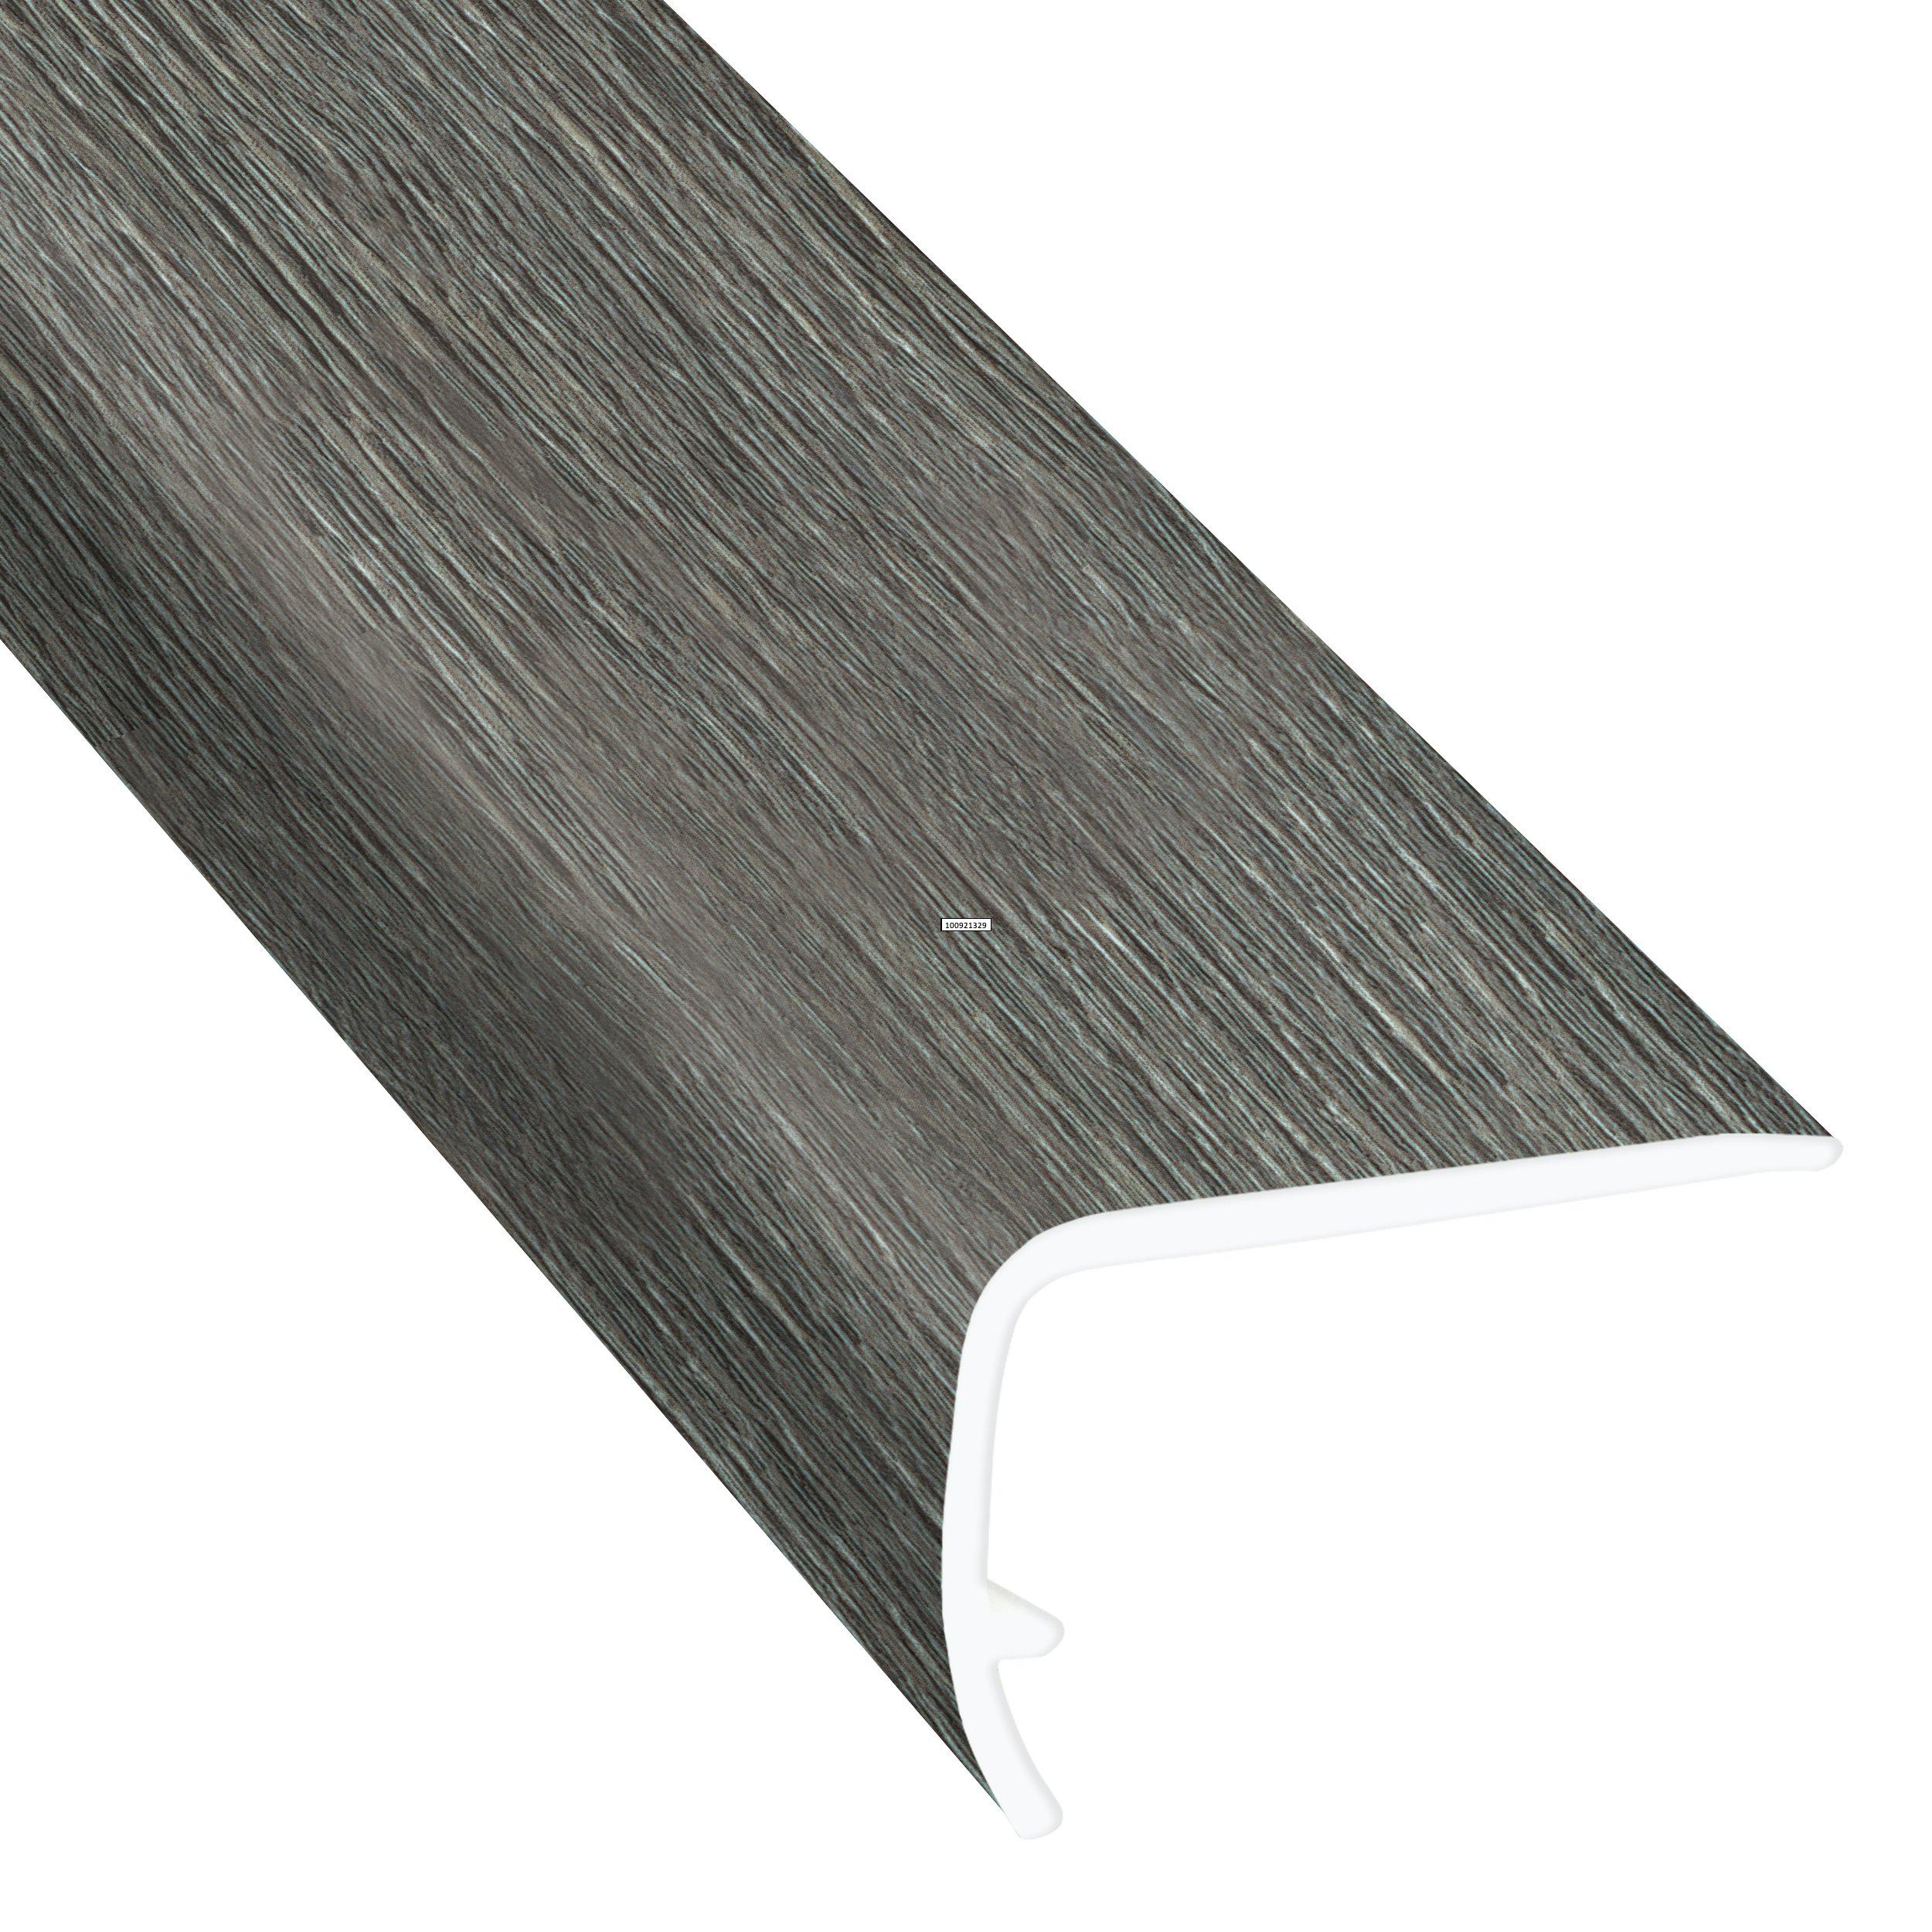 Titan Greige 94in. Vinyl Overlapping Stair Nose